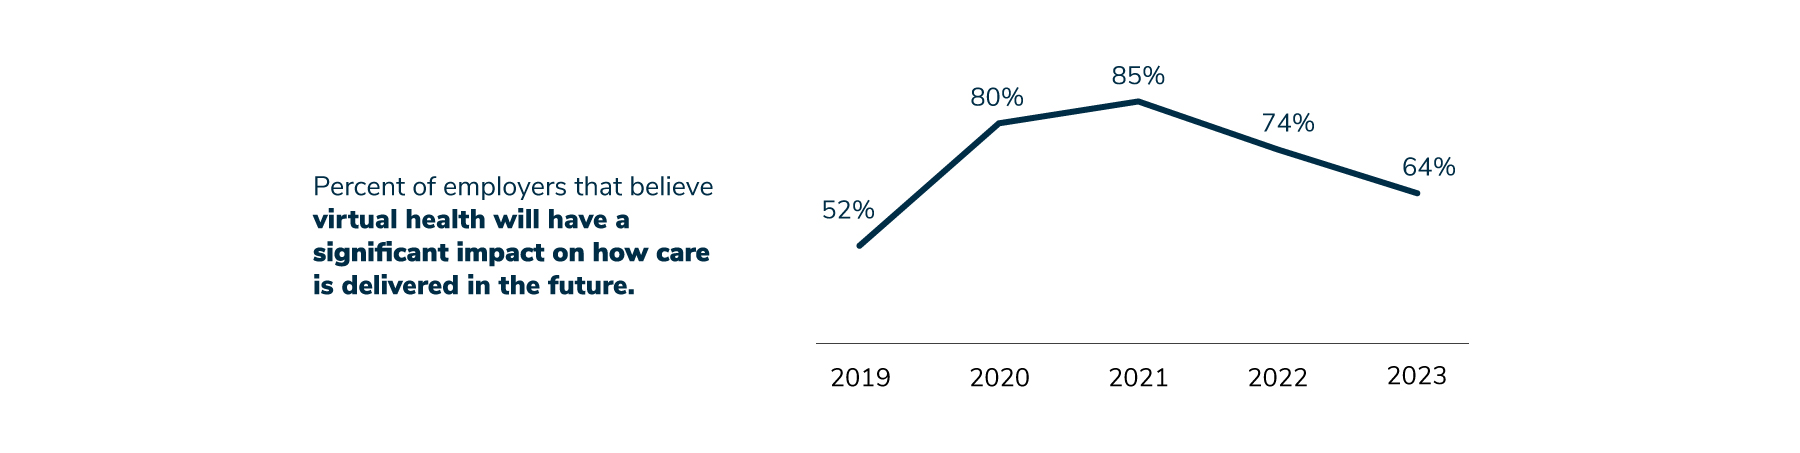 The percentage of employers that believe that virtual care will have a significant or very significant impact on how health care is delivered over the next 3-5 years, increased from 52% in 2019 to 85% in 2021, and then decreased to 74% in 2022 and 64% in 2023.